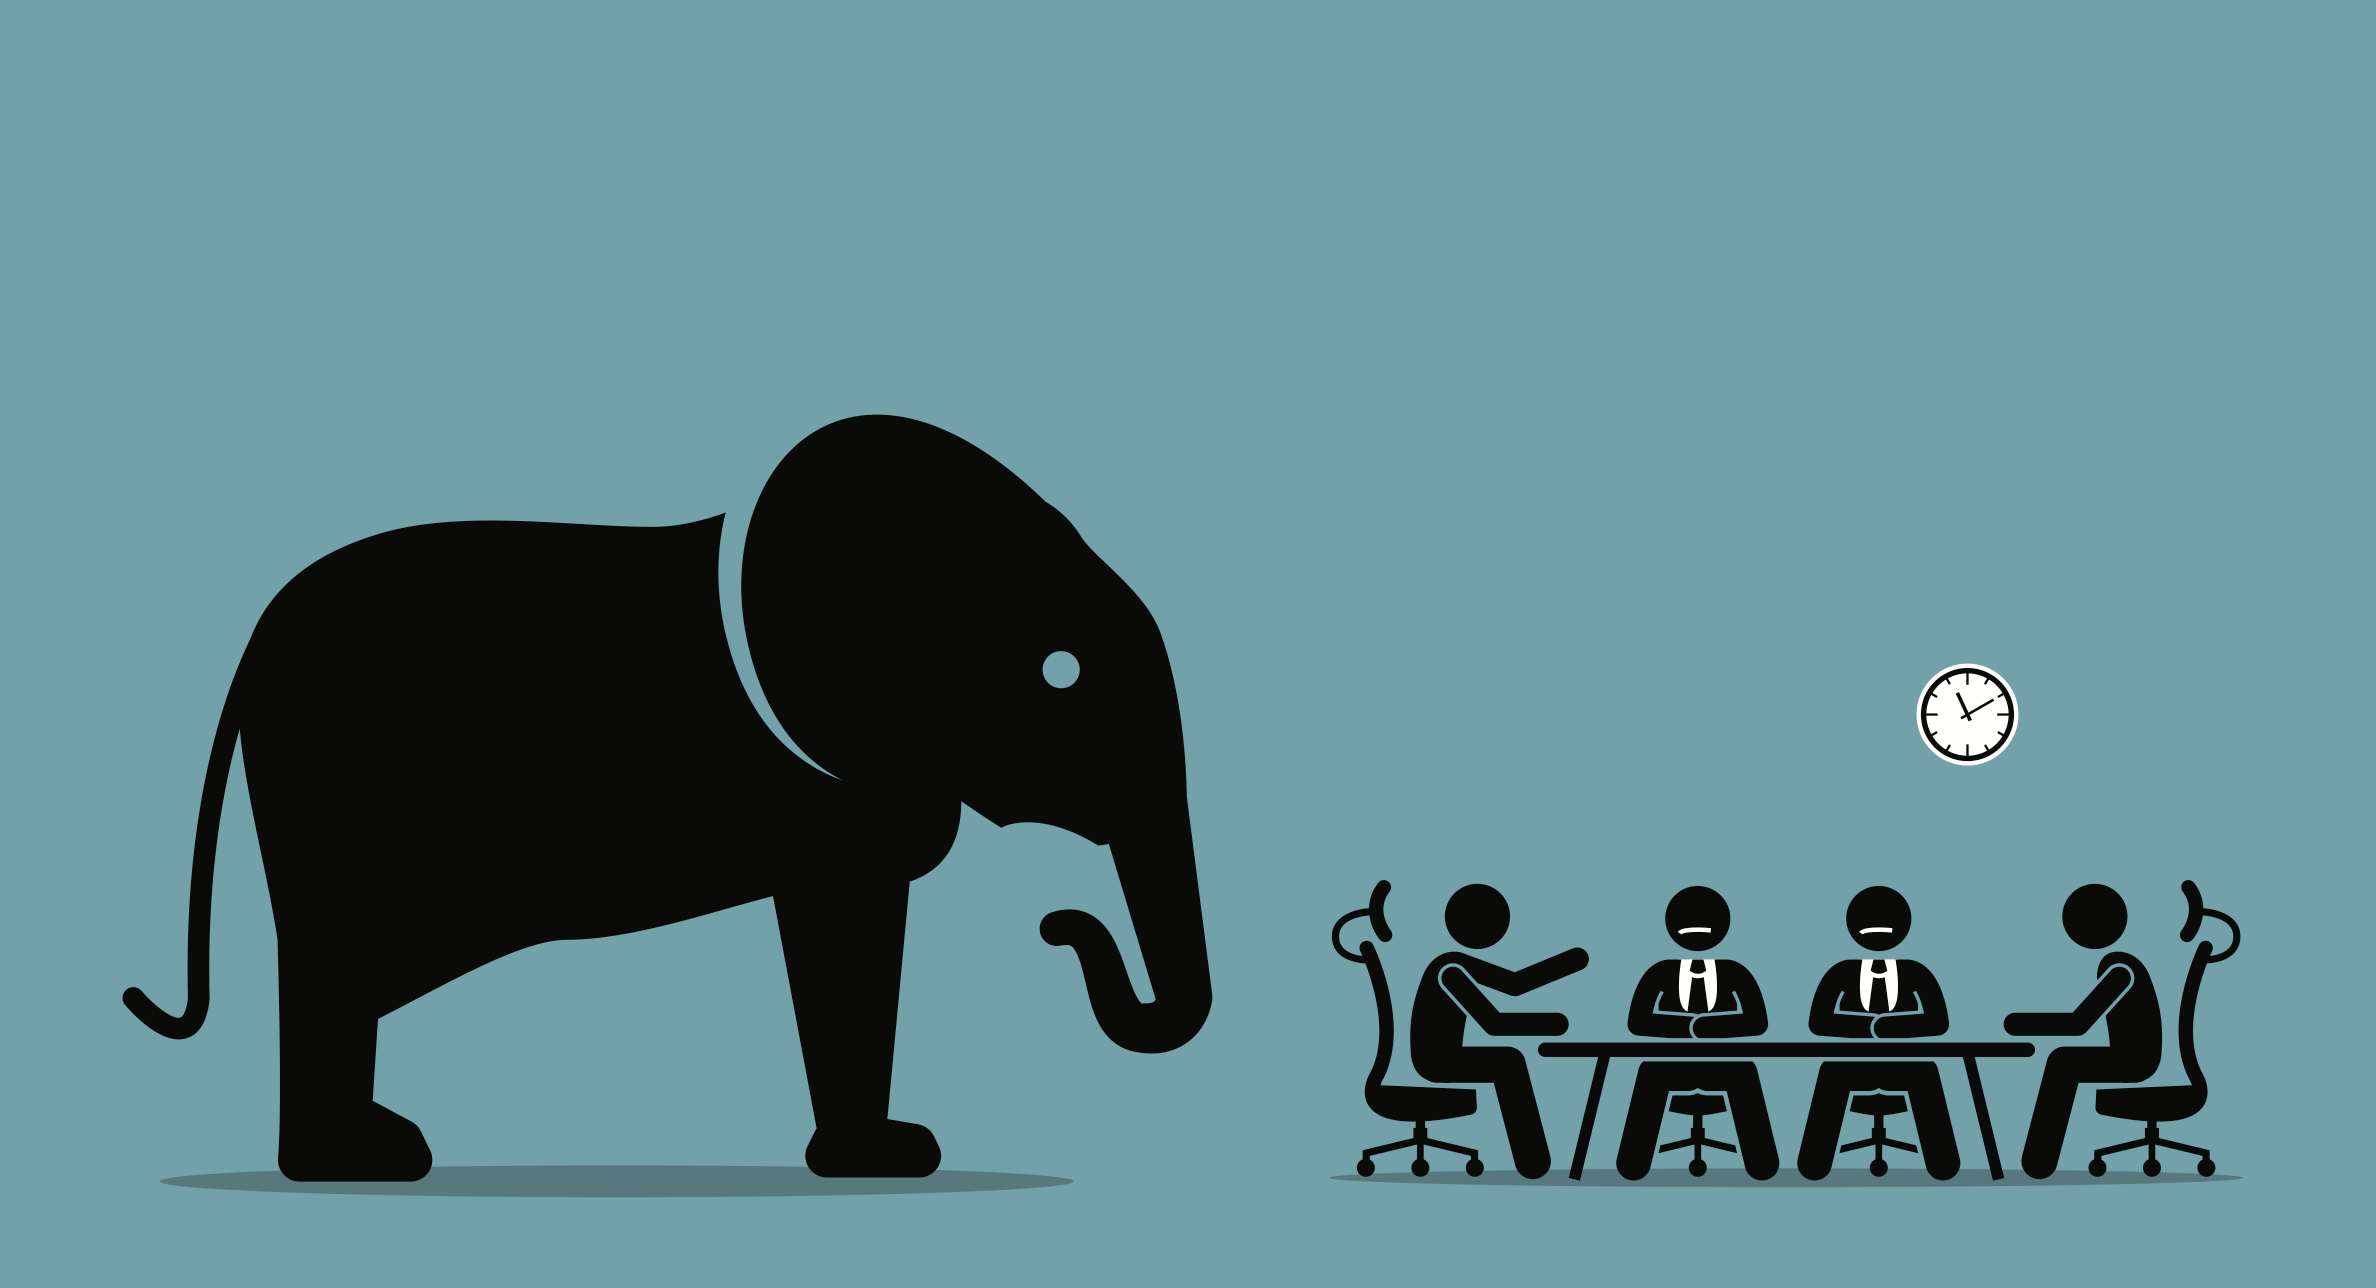 The Elephant in the Room…or should I say in the Market?